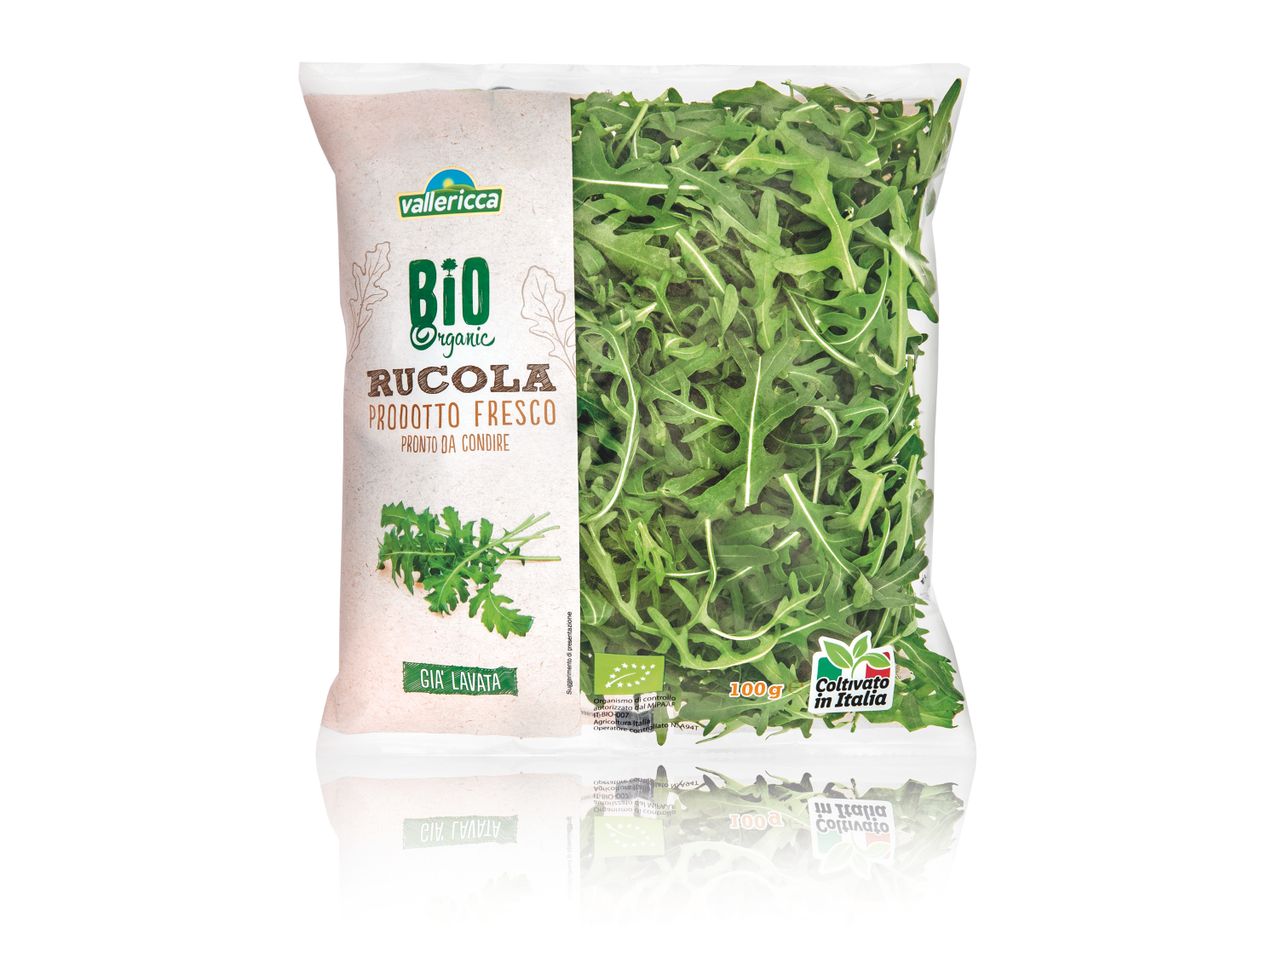 Go to full screen view: Organic Rucola - Image 1